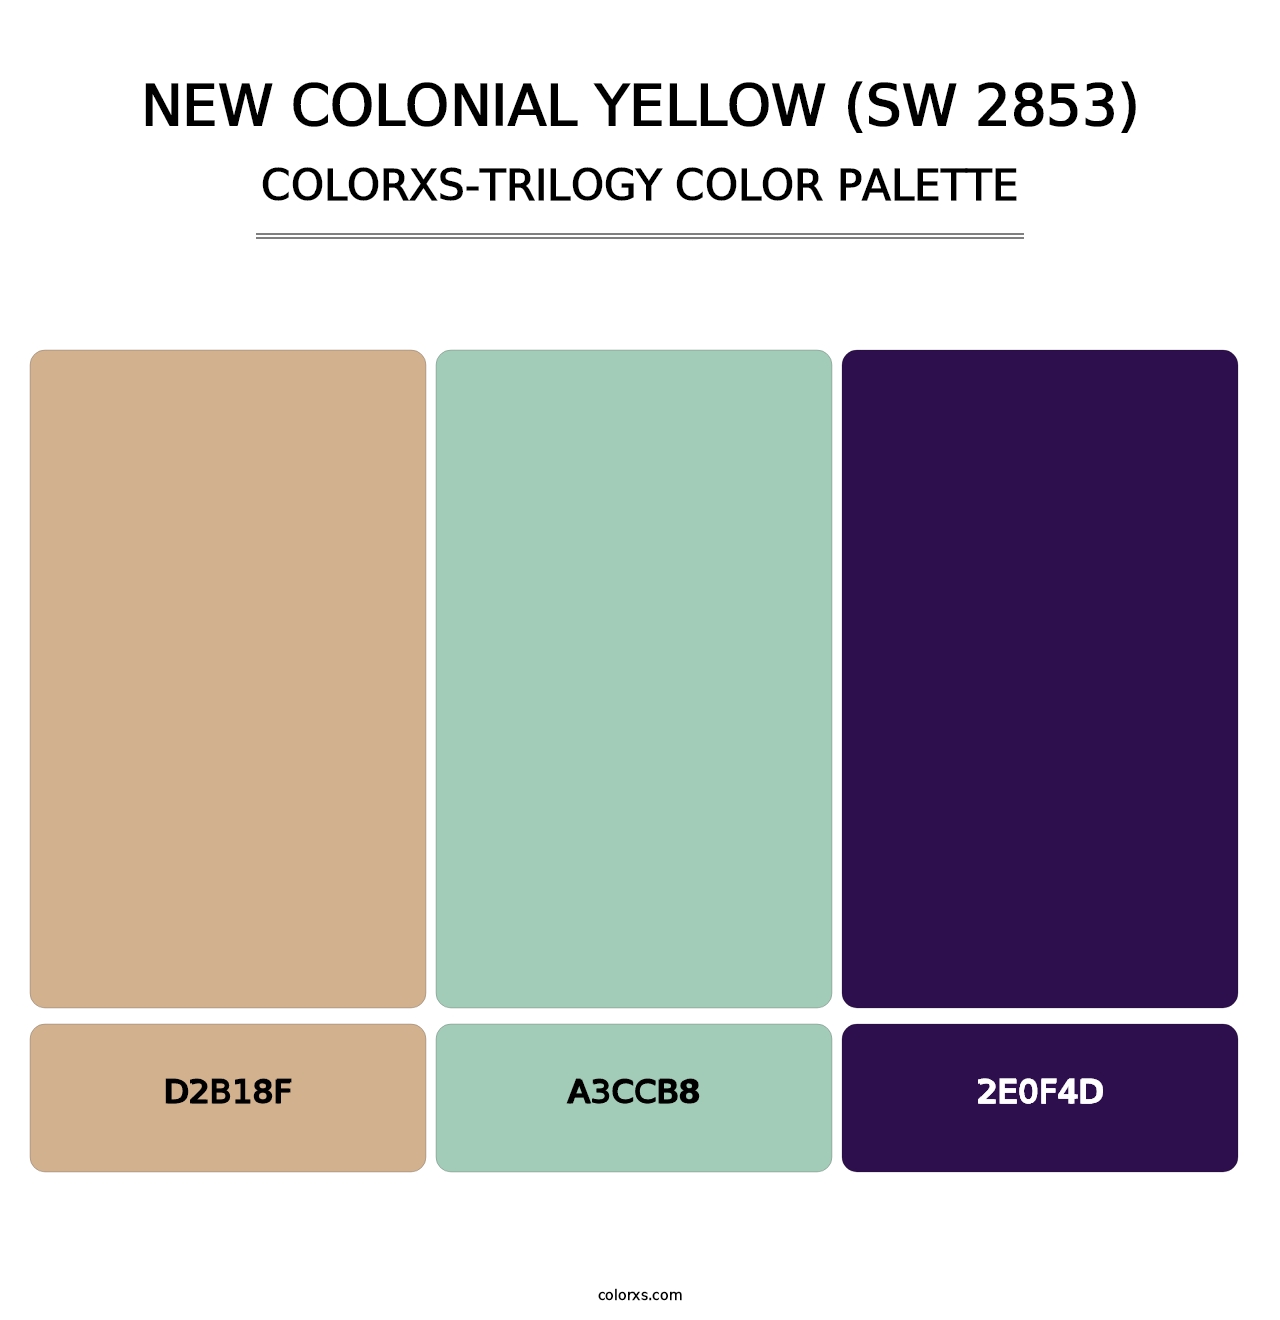 New Colonial Yellow (SW 2853) - Colorxs Trilogy Palette